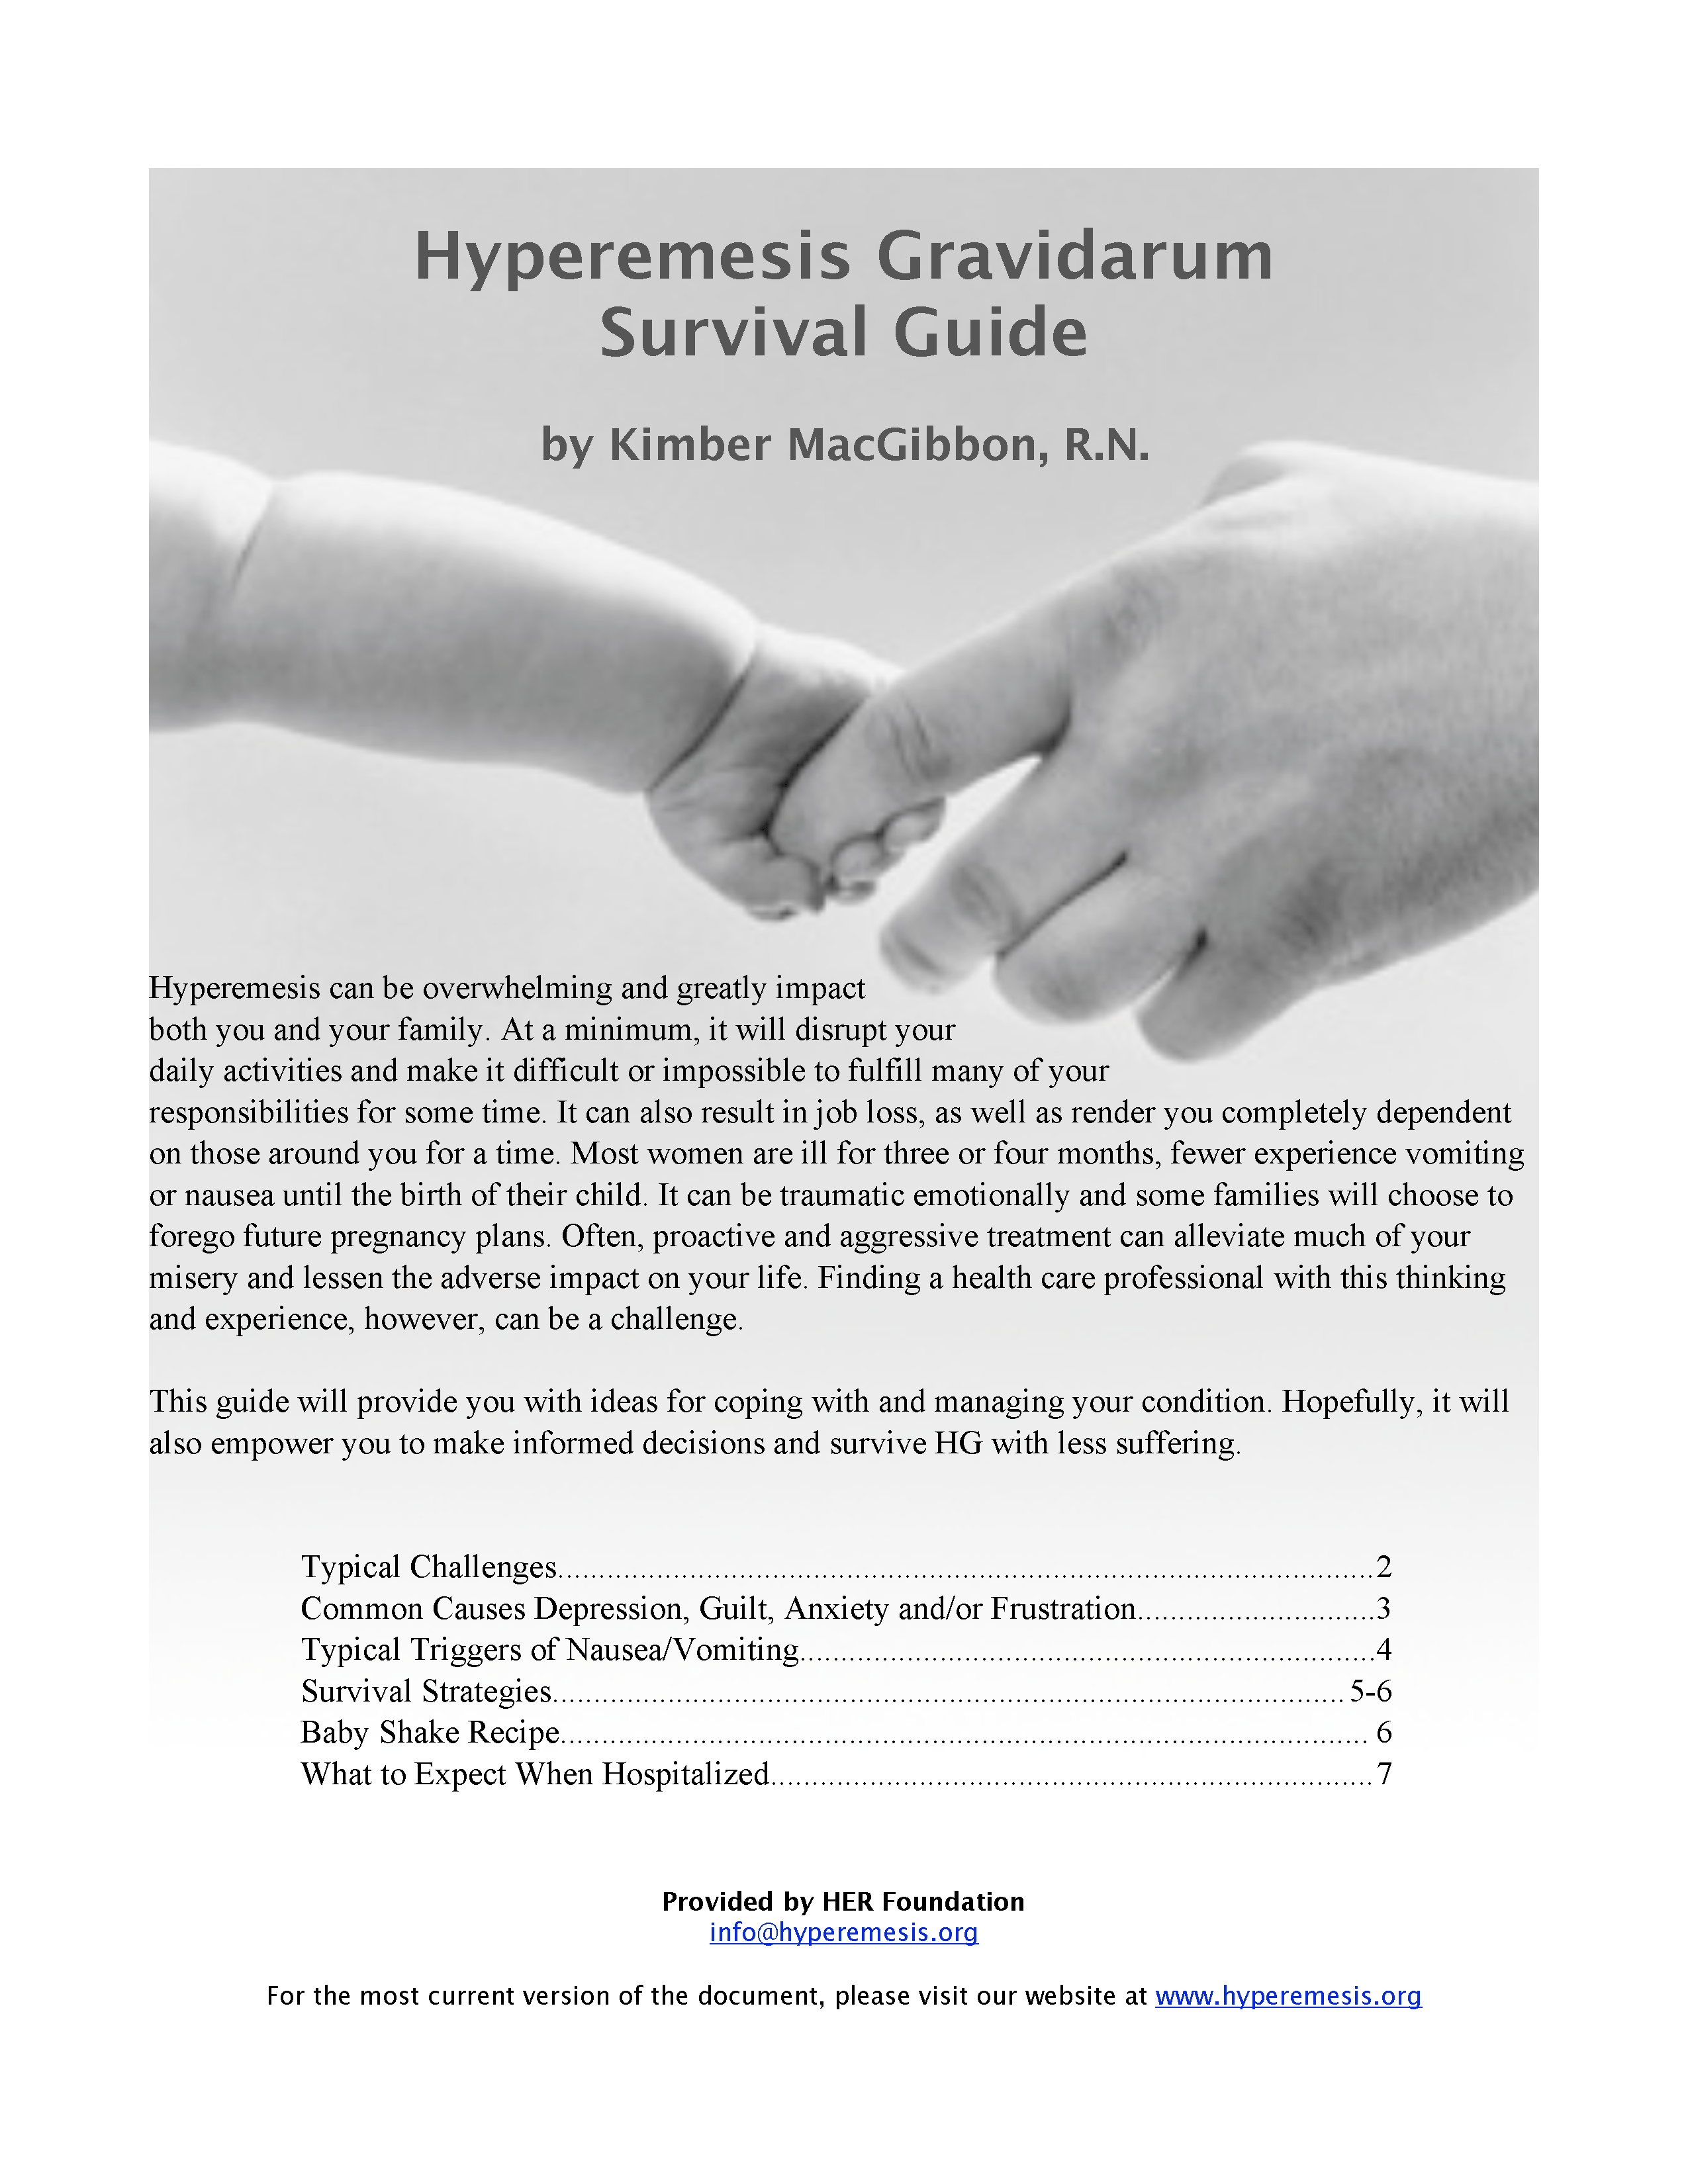 survival-guide_Page_1